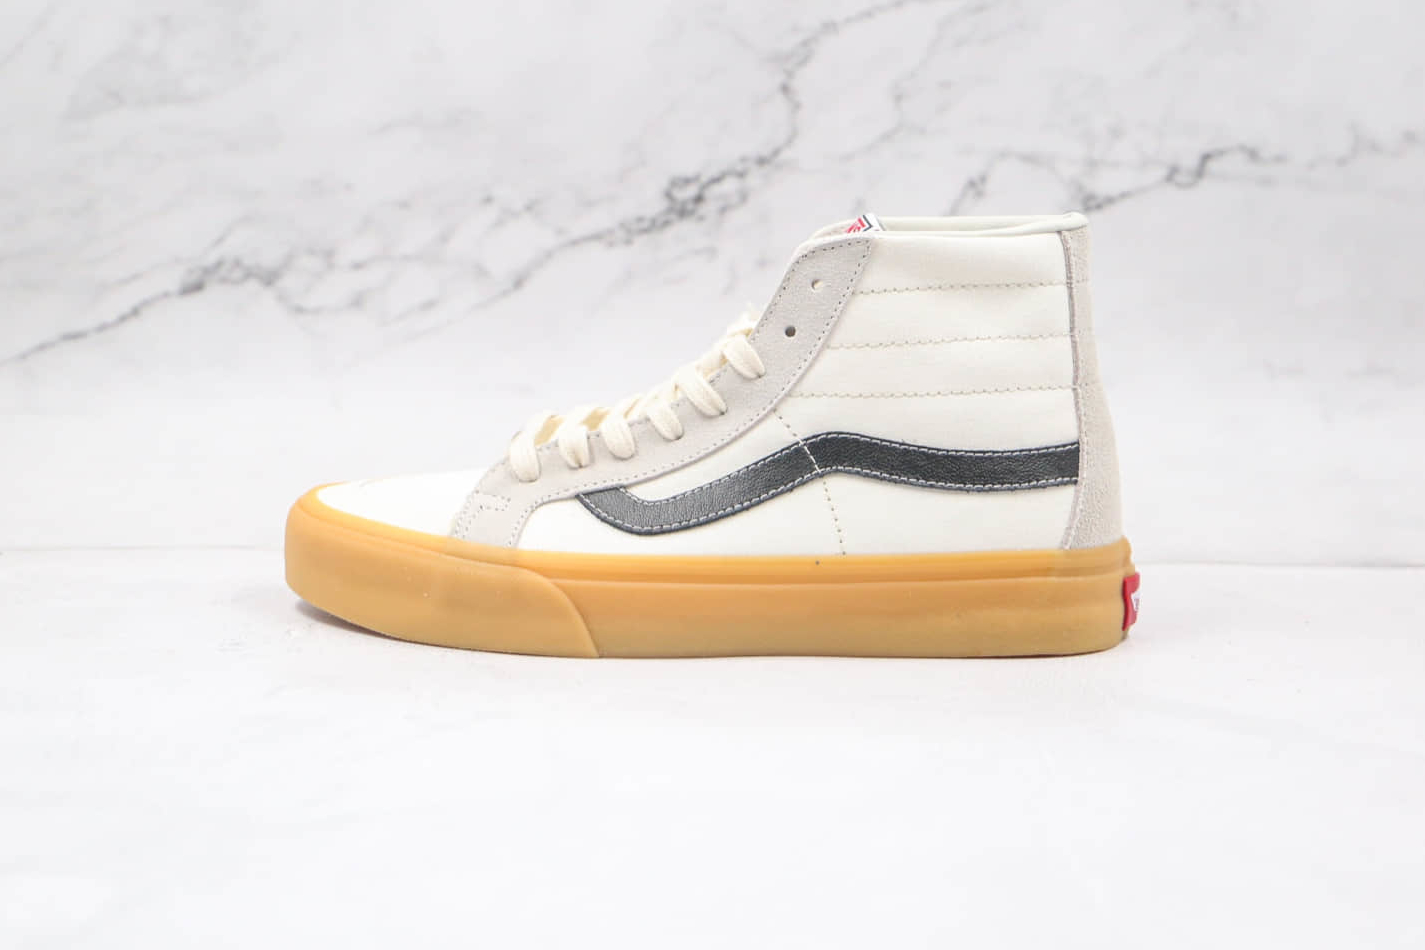 Vans Sk8-Hi Sail Gum Sole - Classic Style and Exceptional Comfort